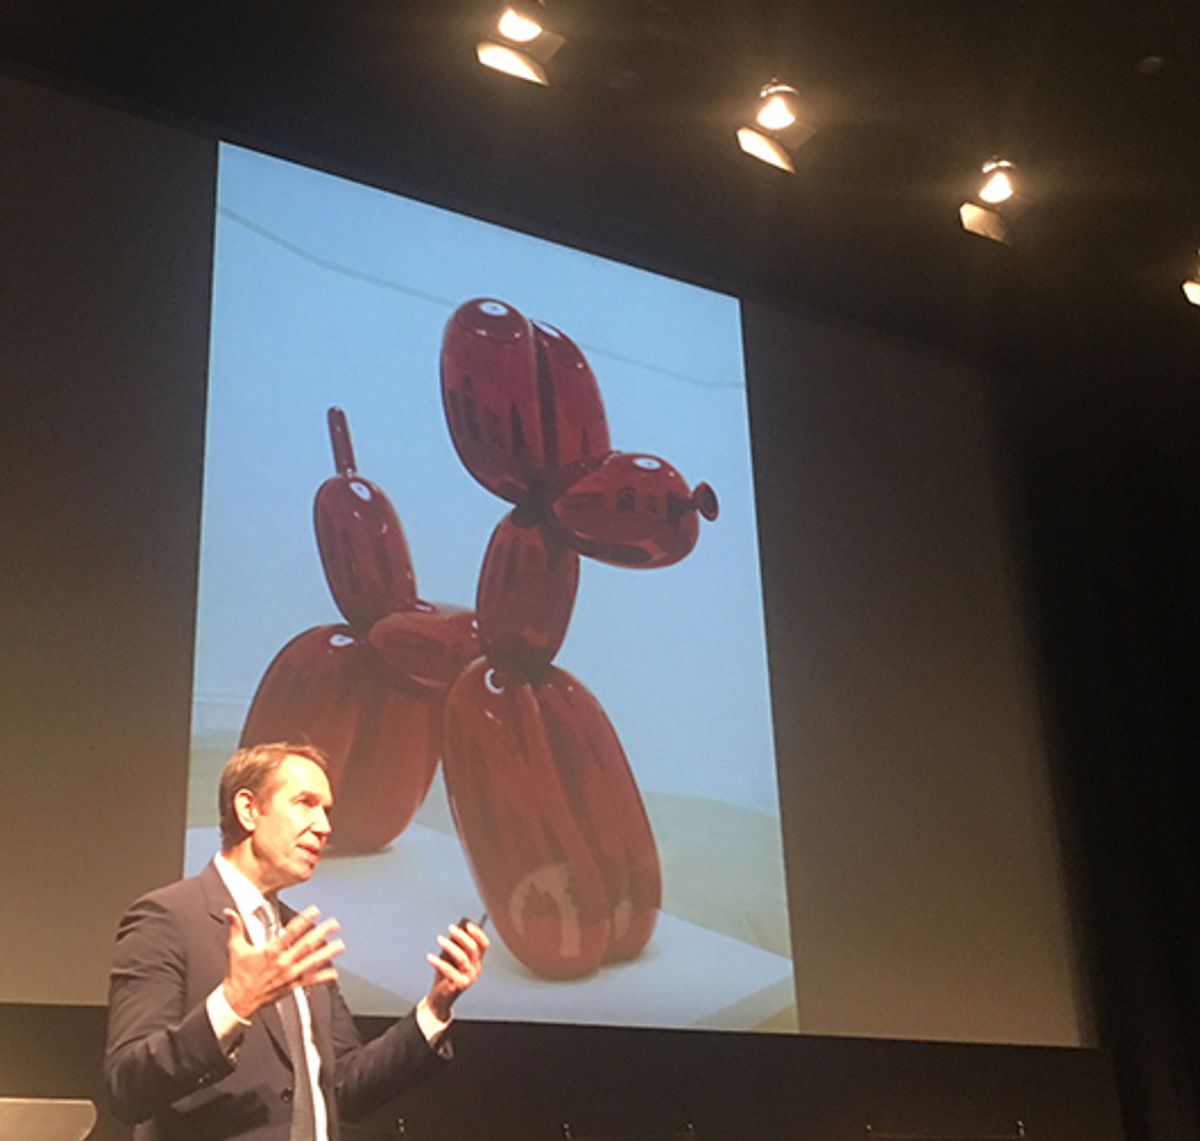 Jeff Koons speaking at the 50th annual David Rockefeller Lecture Series in New York, 5 June 2018 Gabriella Angeleti